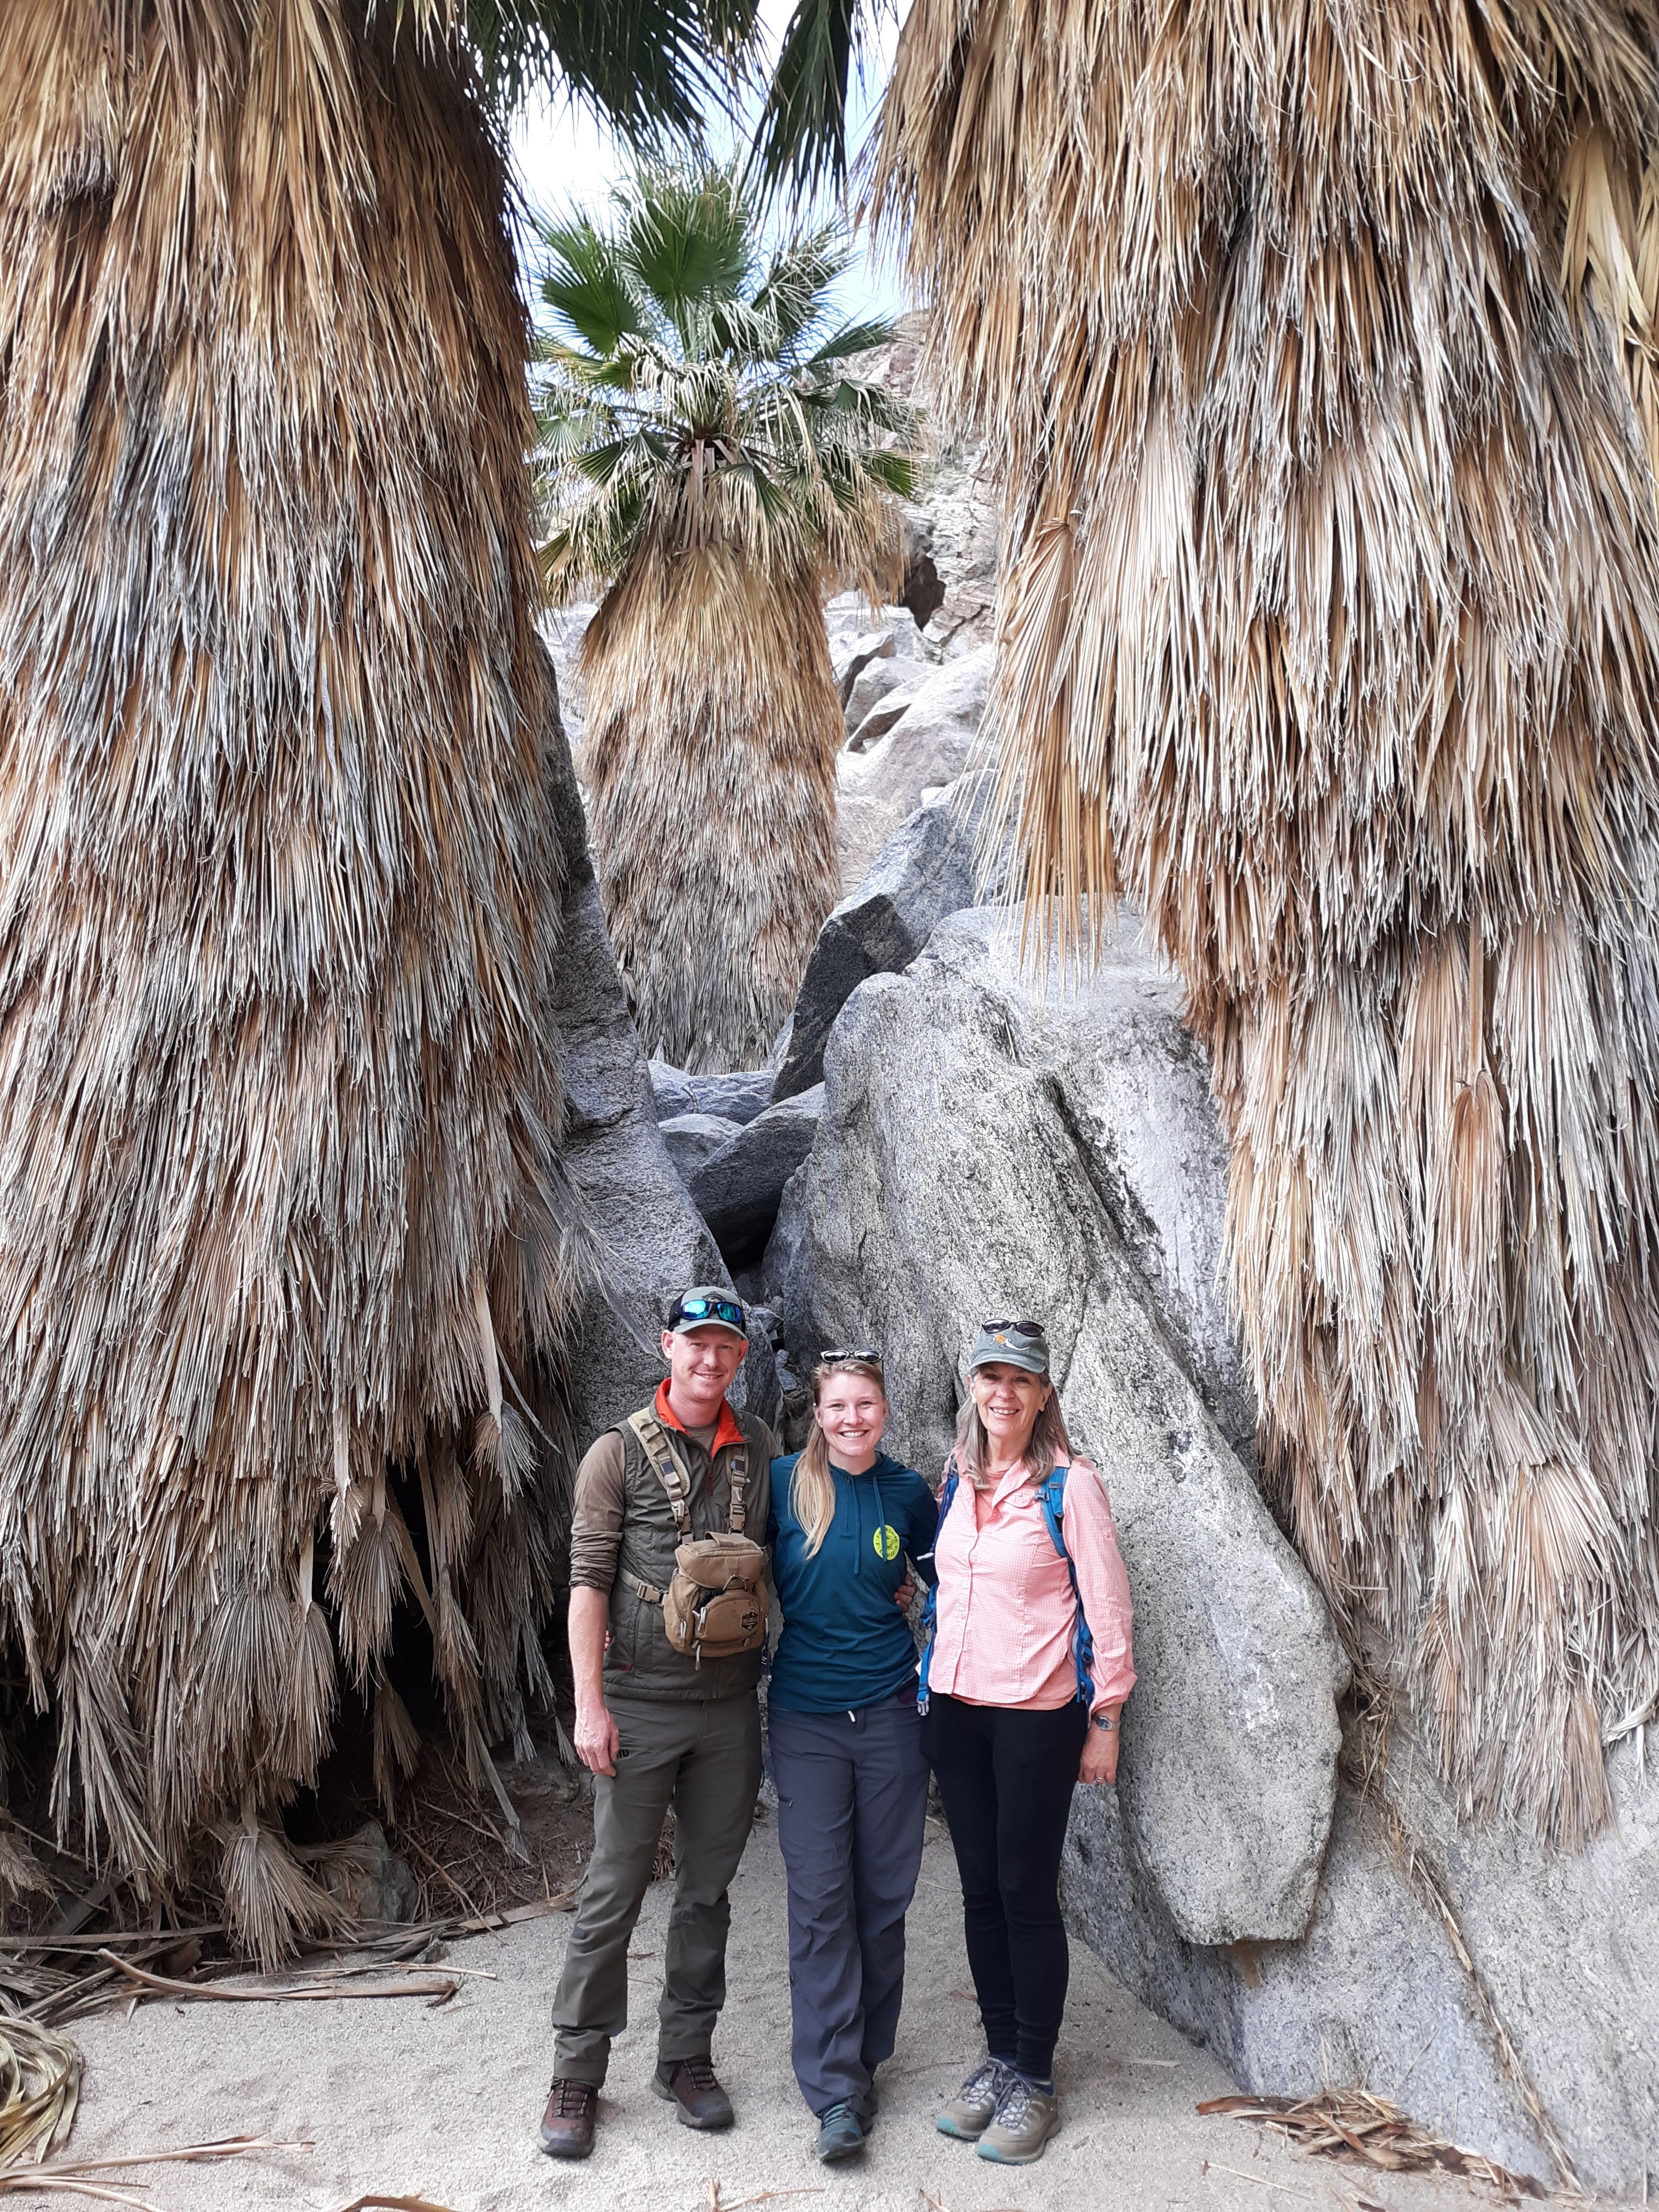 A group of naturalists in front of palm trees